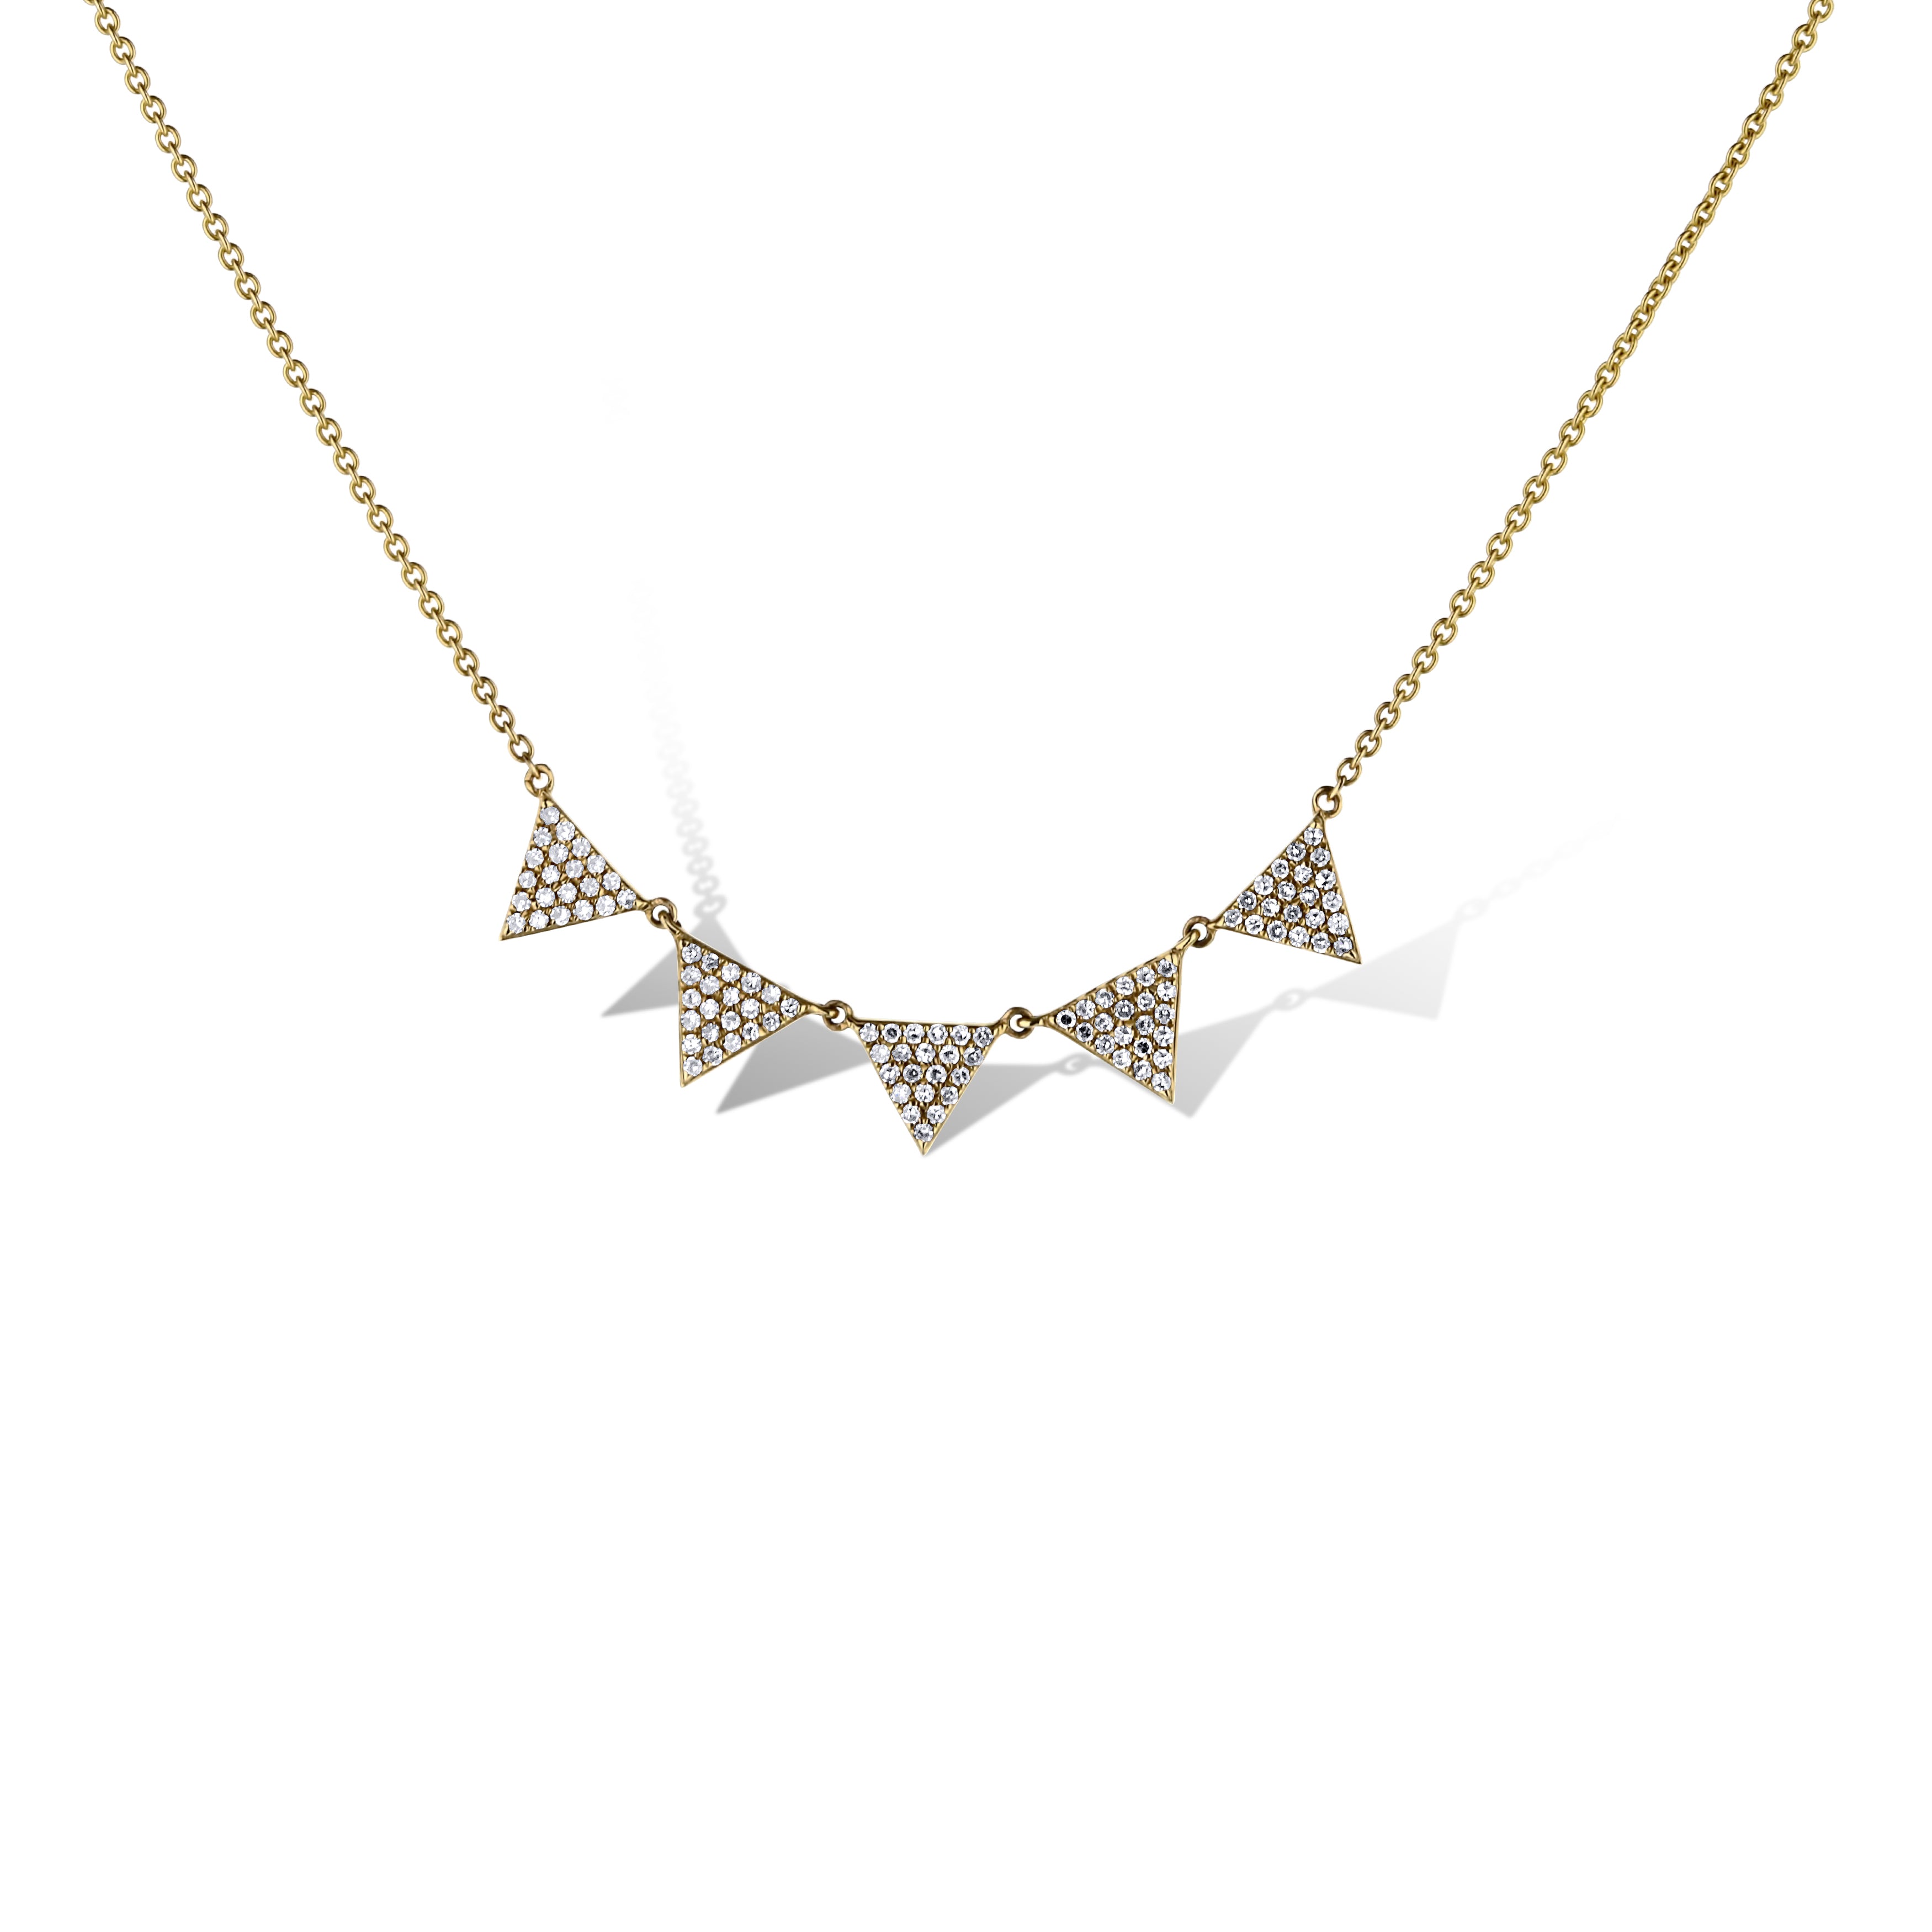 Geometric Gold Filled Necklace | H Studio Jewelry